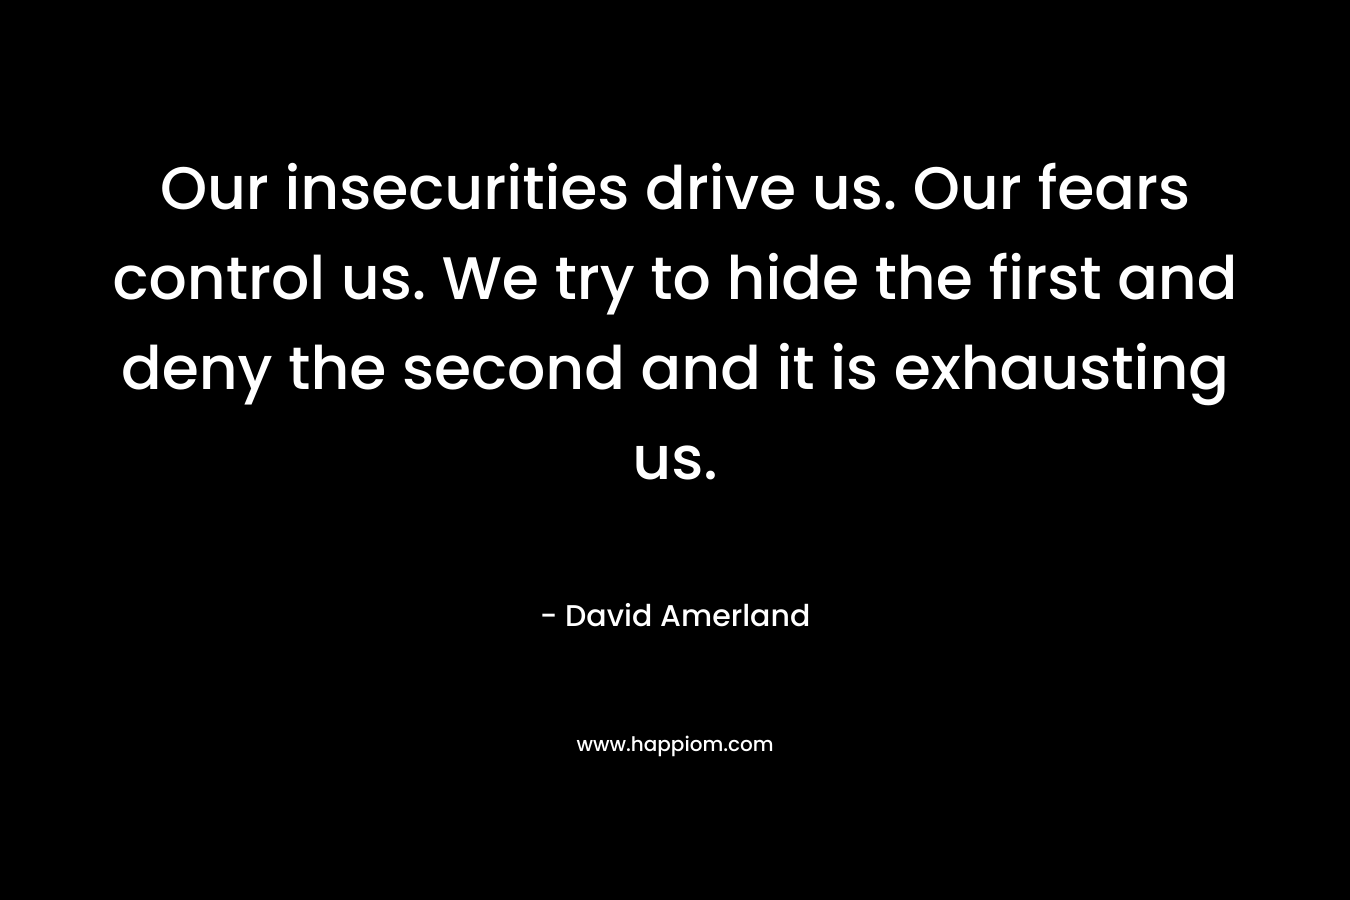 Our insecurities drive us. Our fears control us. We try to hide the first and deny the second and it is exhausting us.